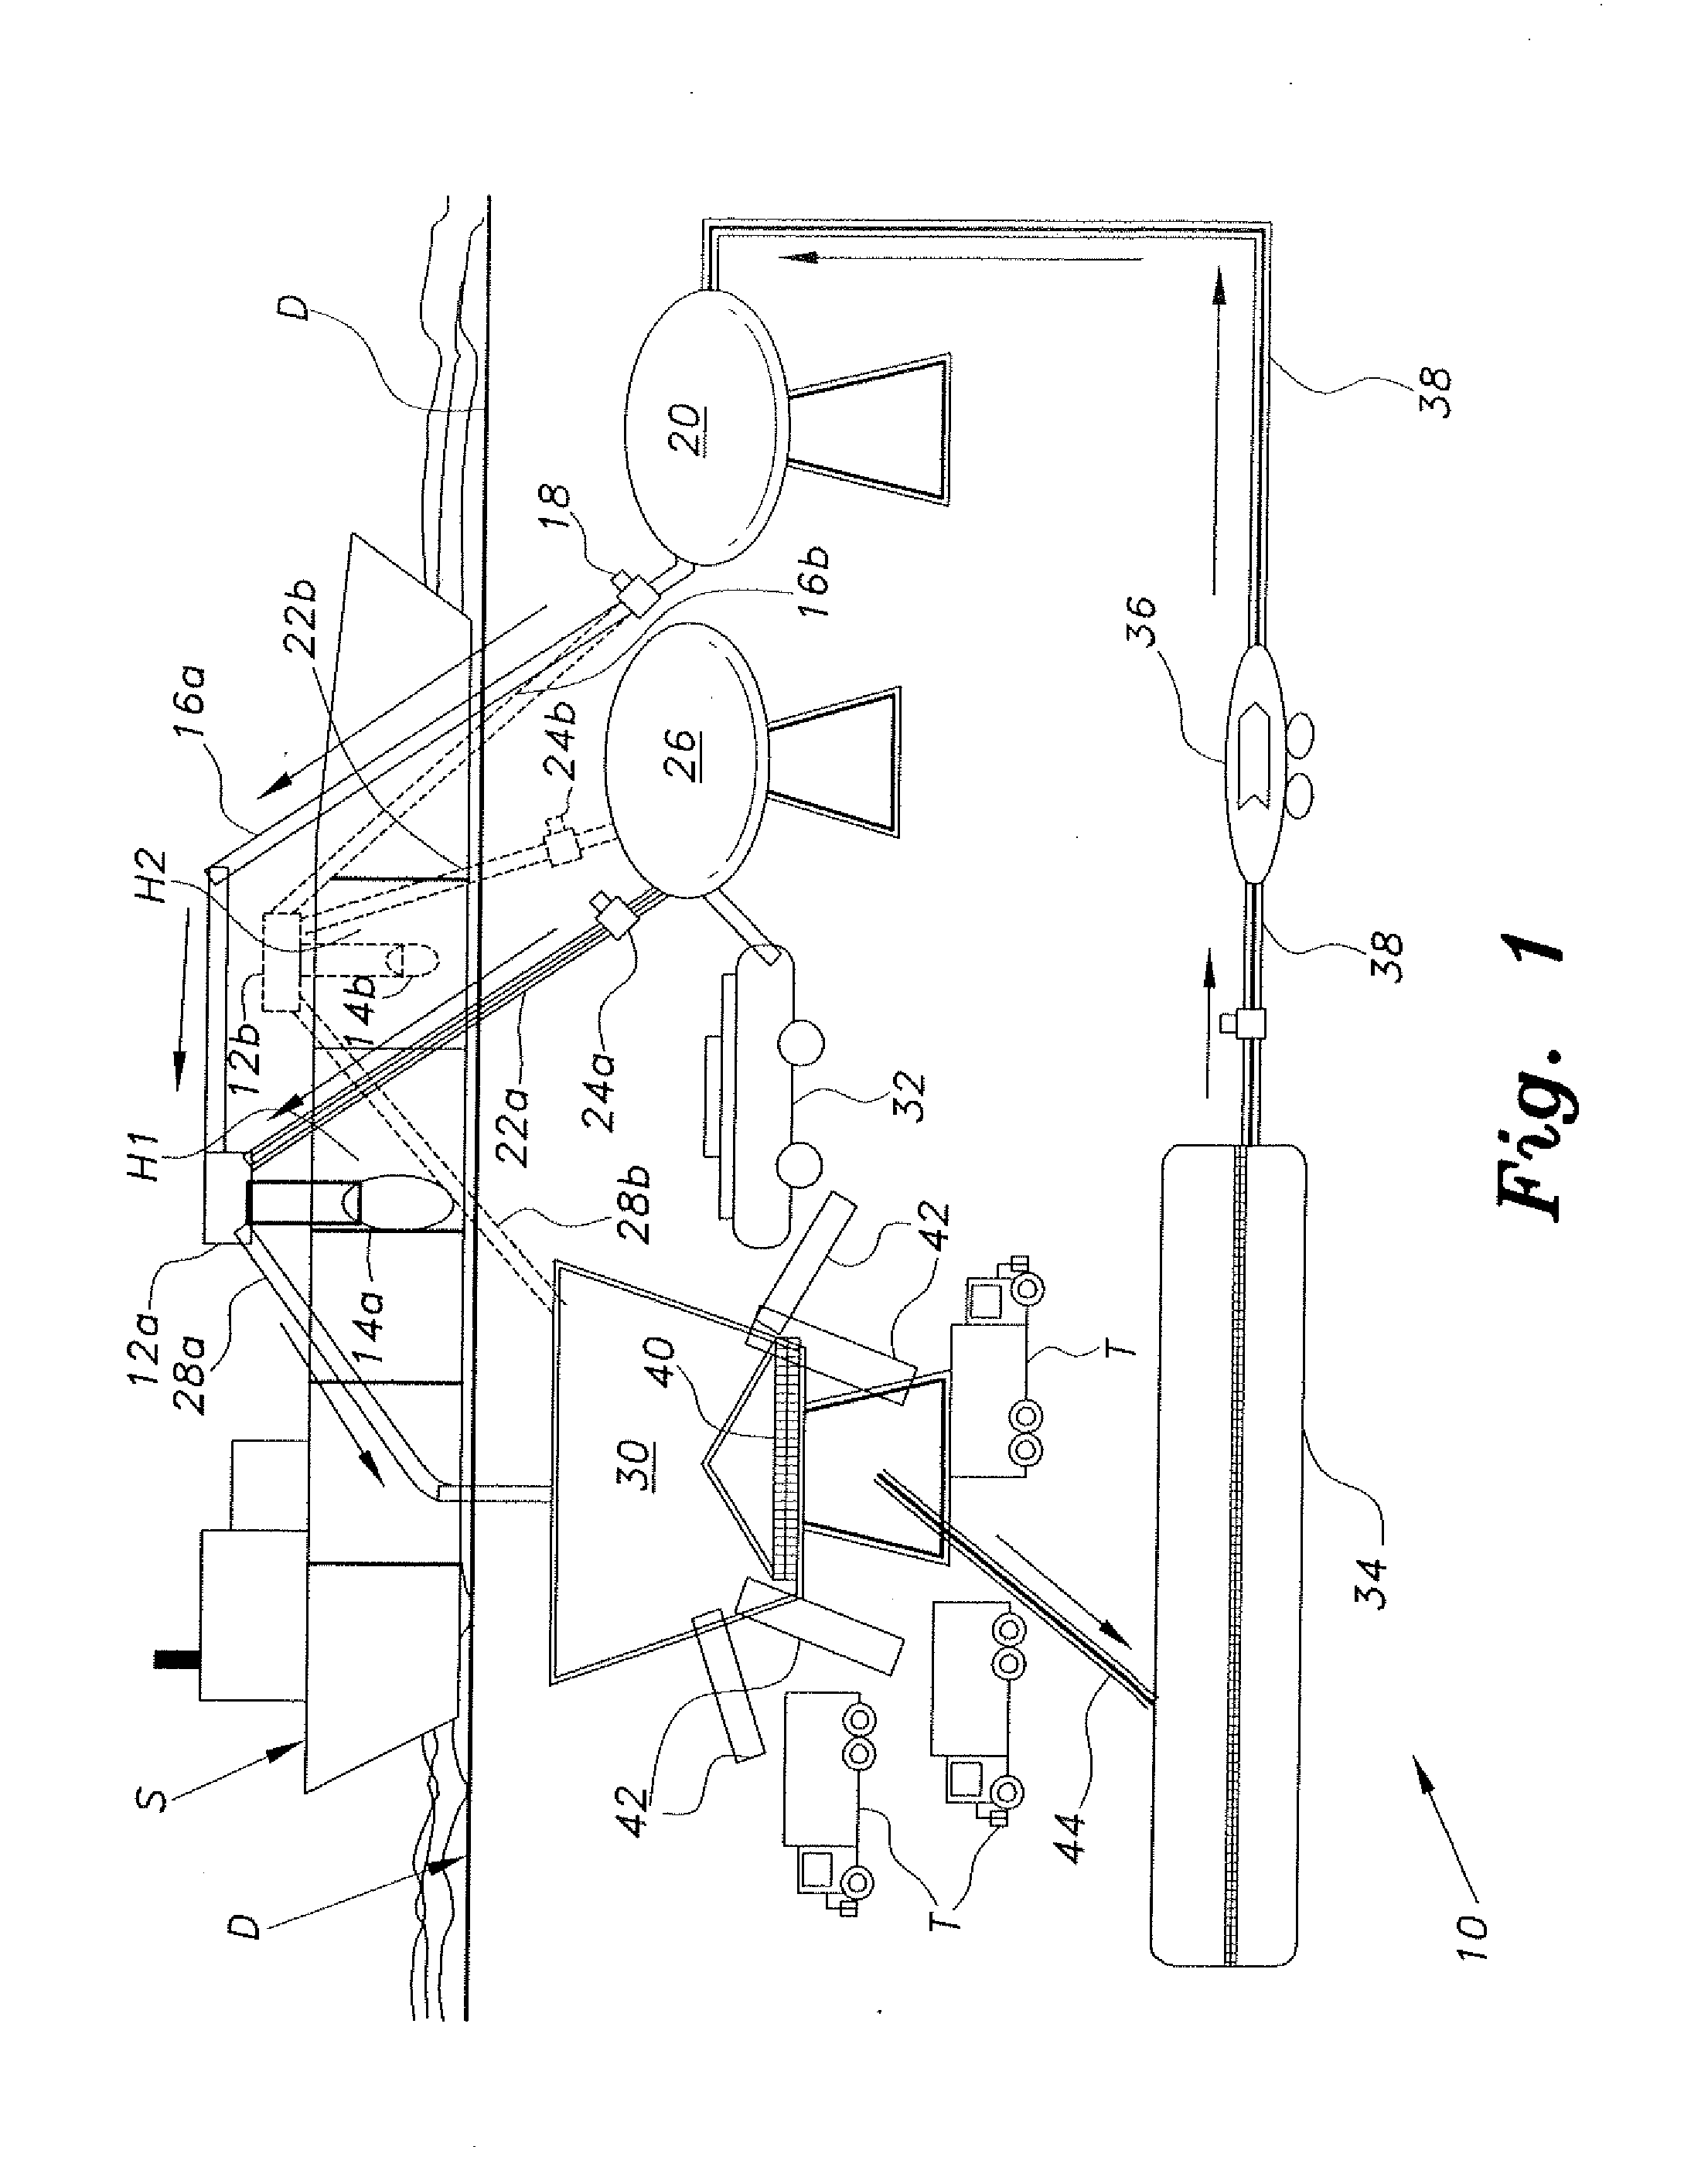 Aggregate processing system